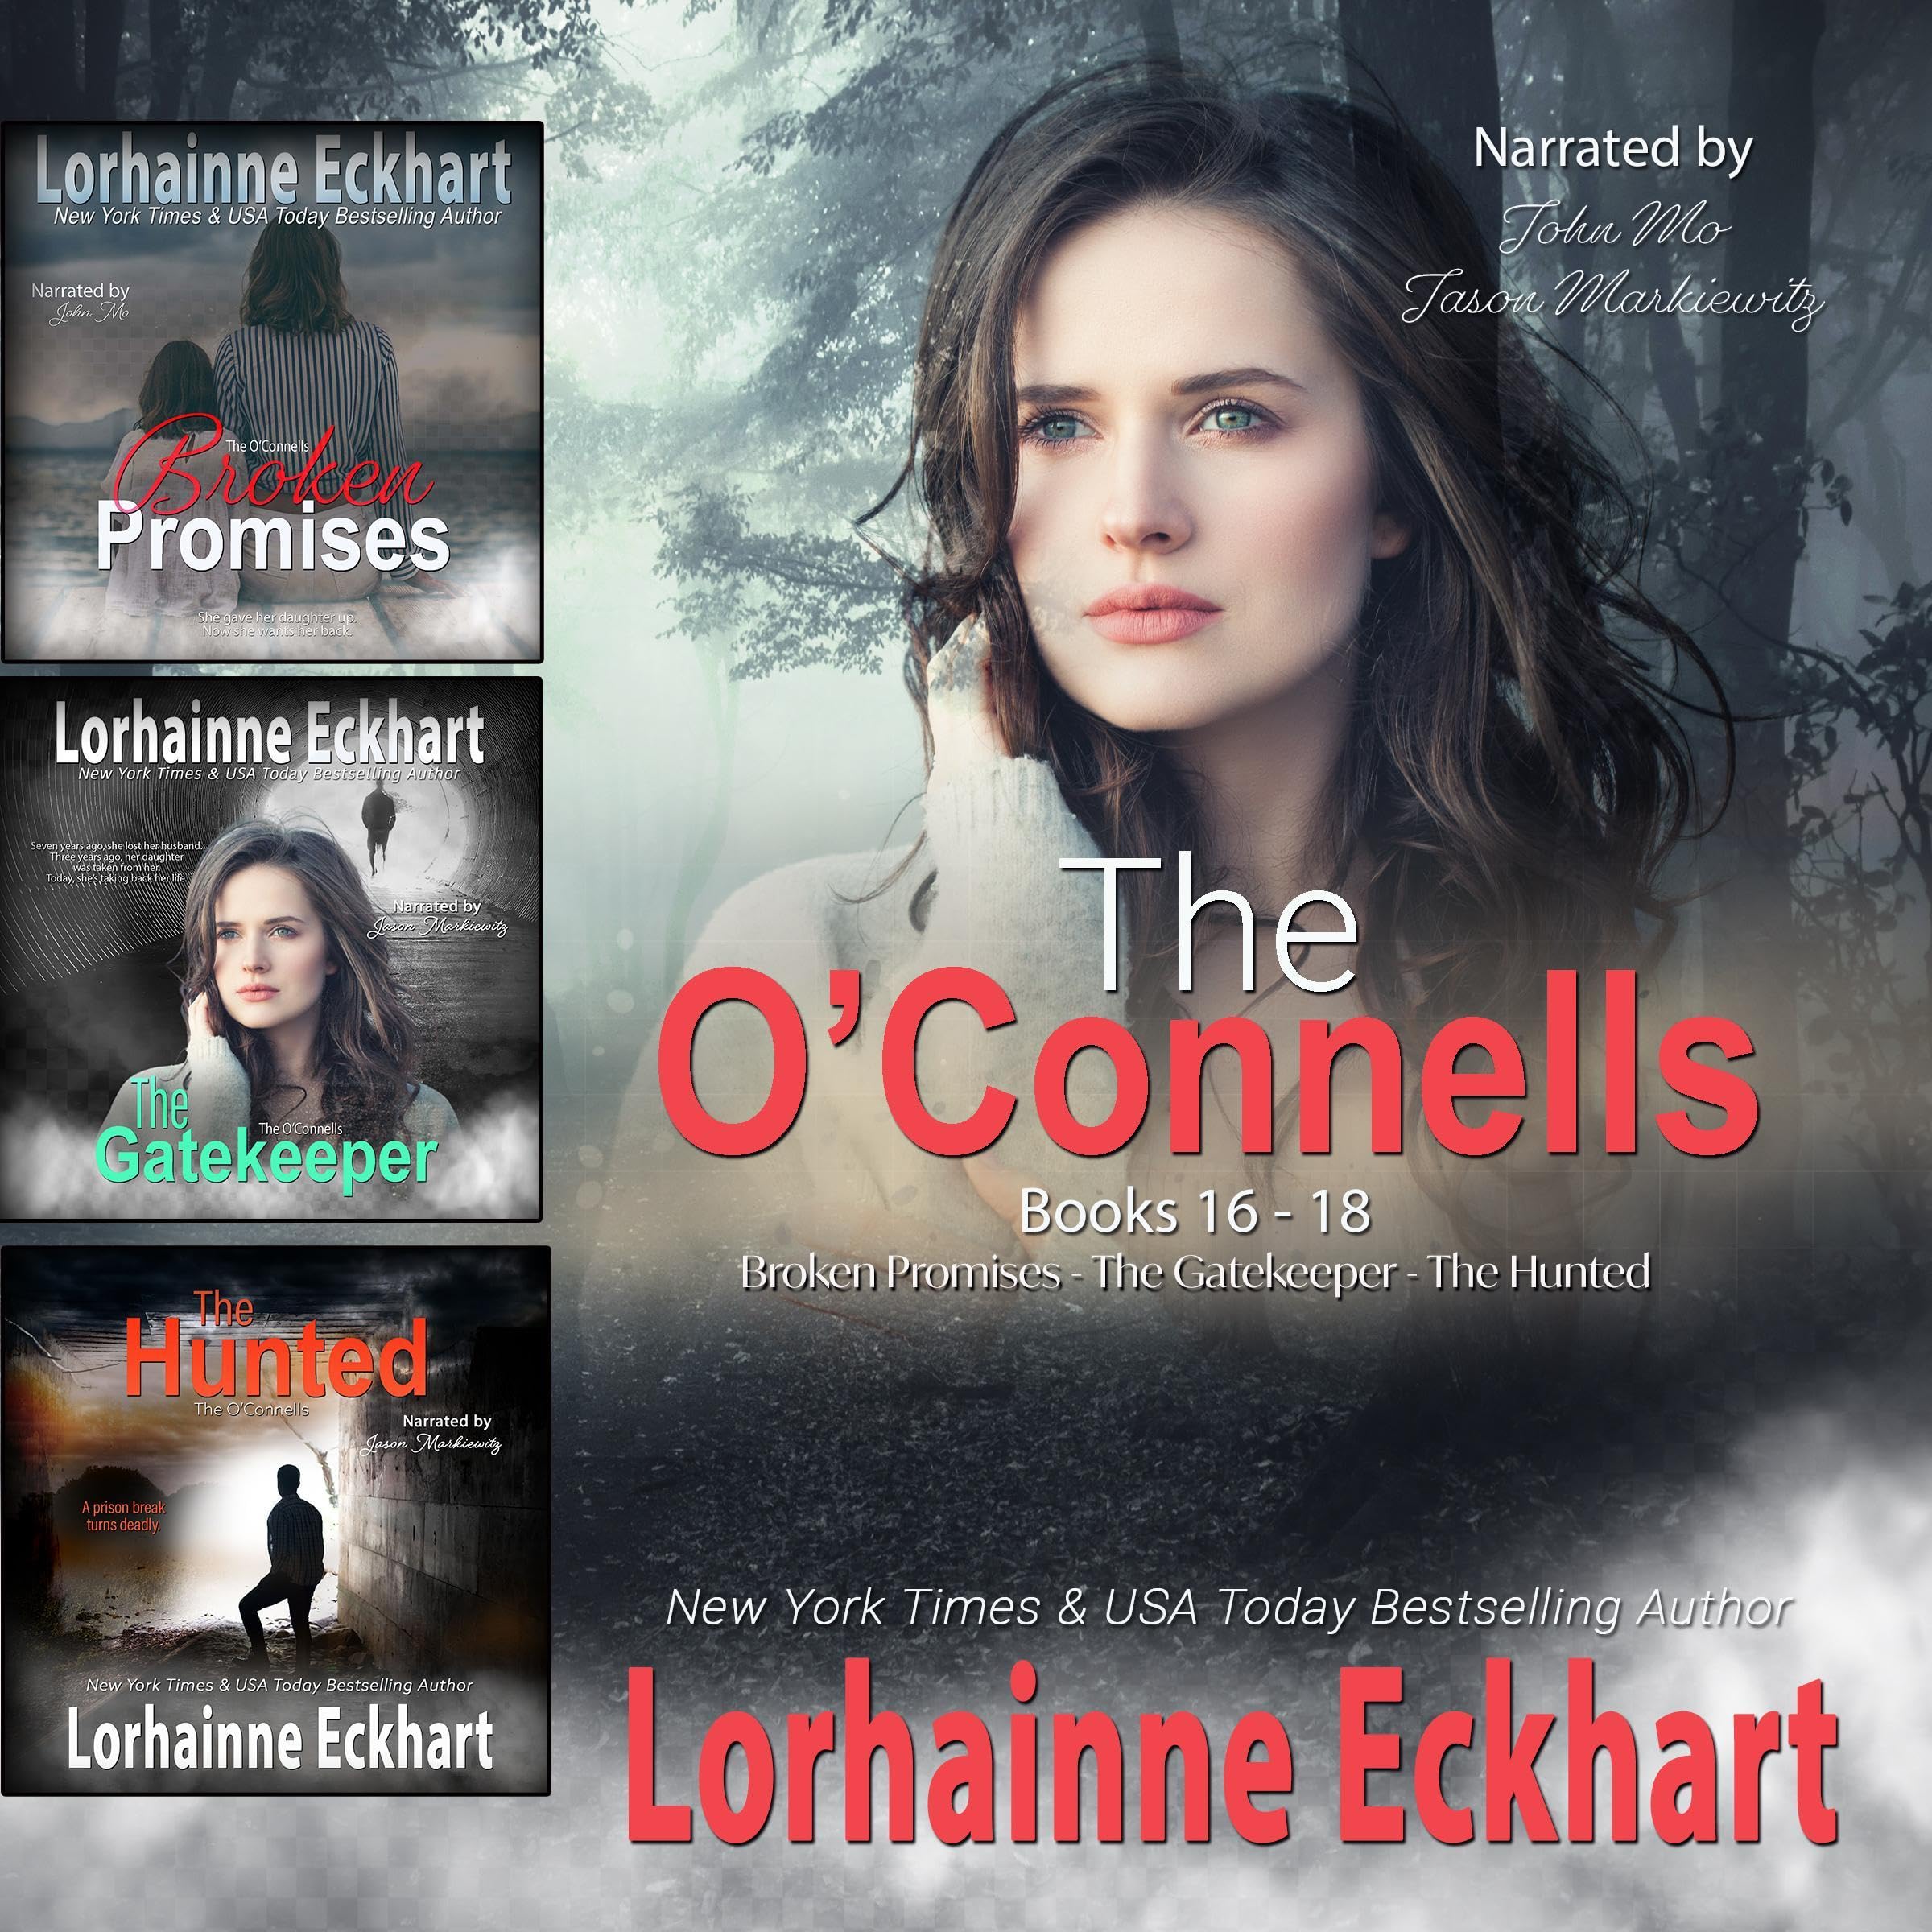 Books in Order: The Comprehensive Reading Guide for Lorhainne Eckhart’s Works